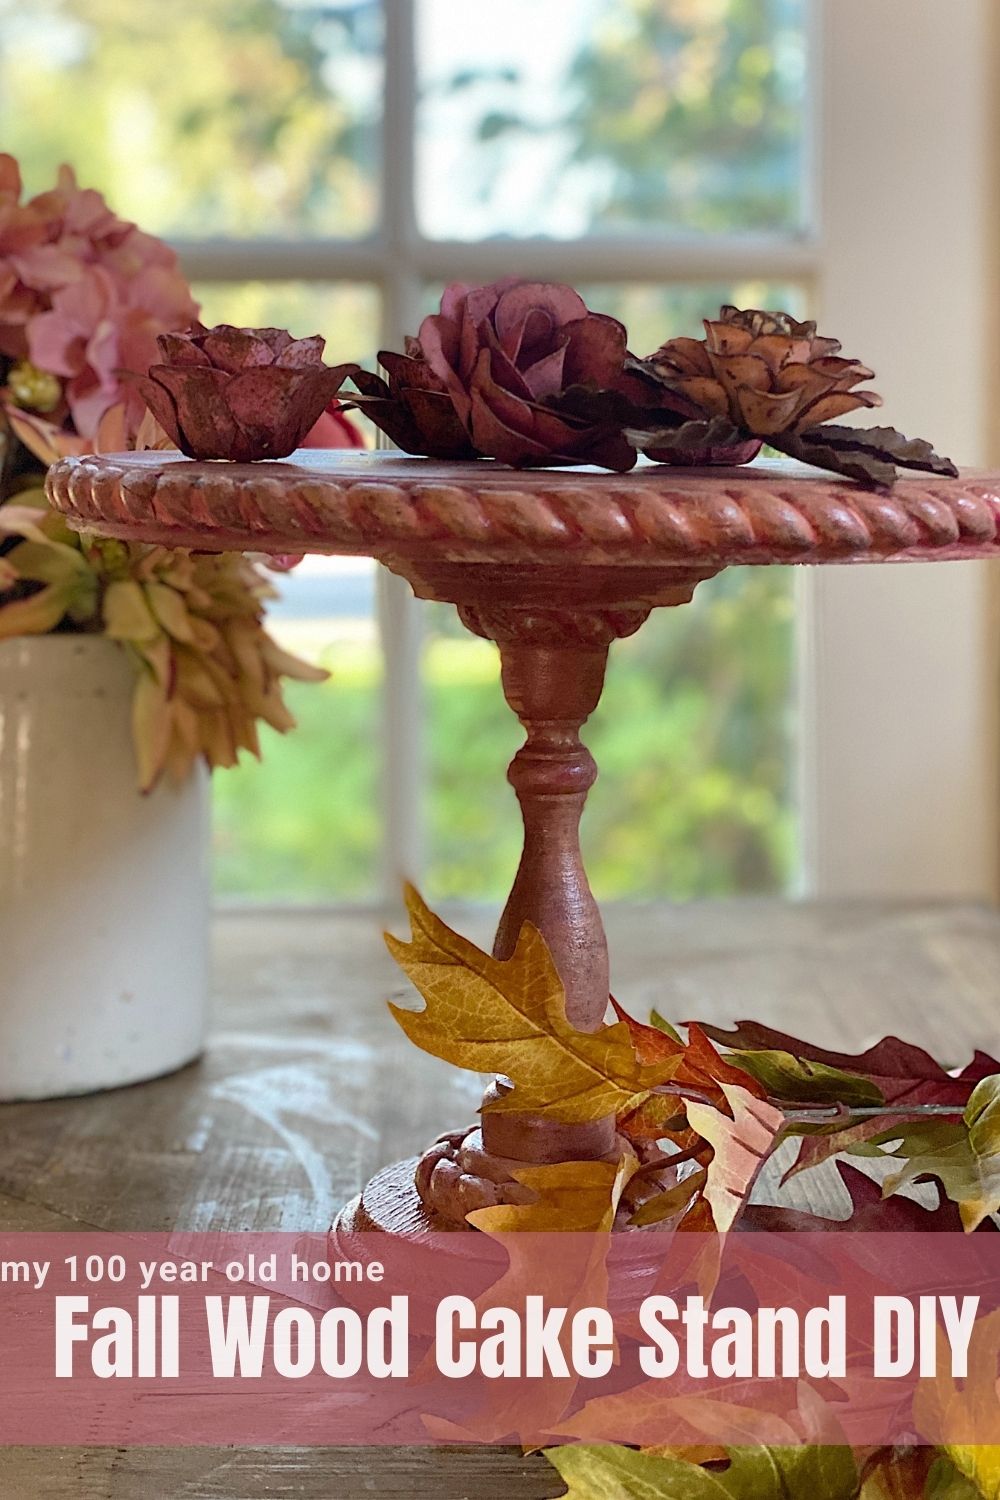 I have been busy making crafts for fall and I love my latest DIY - a fall wood cake stand. I chose to use fall colors (instead of white) and am so happy I did!